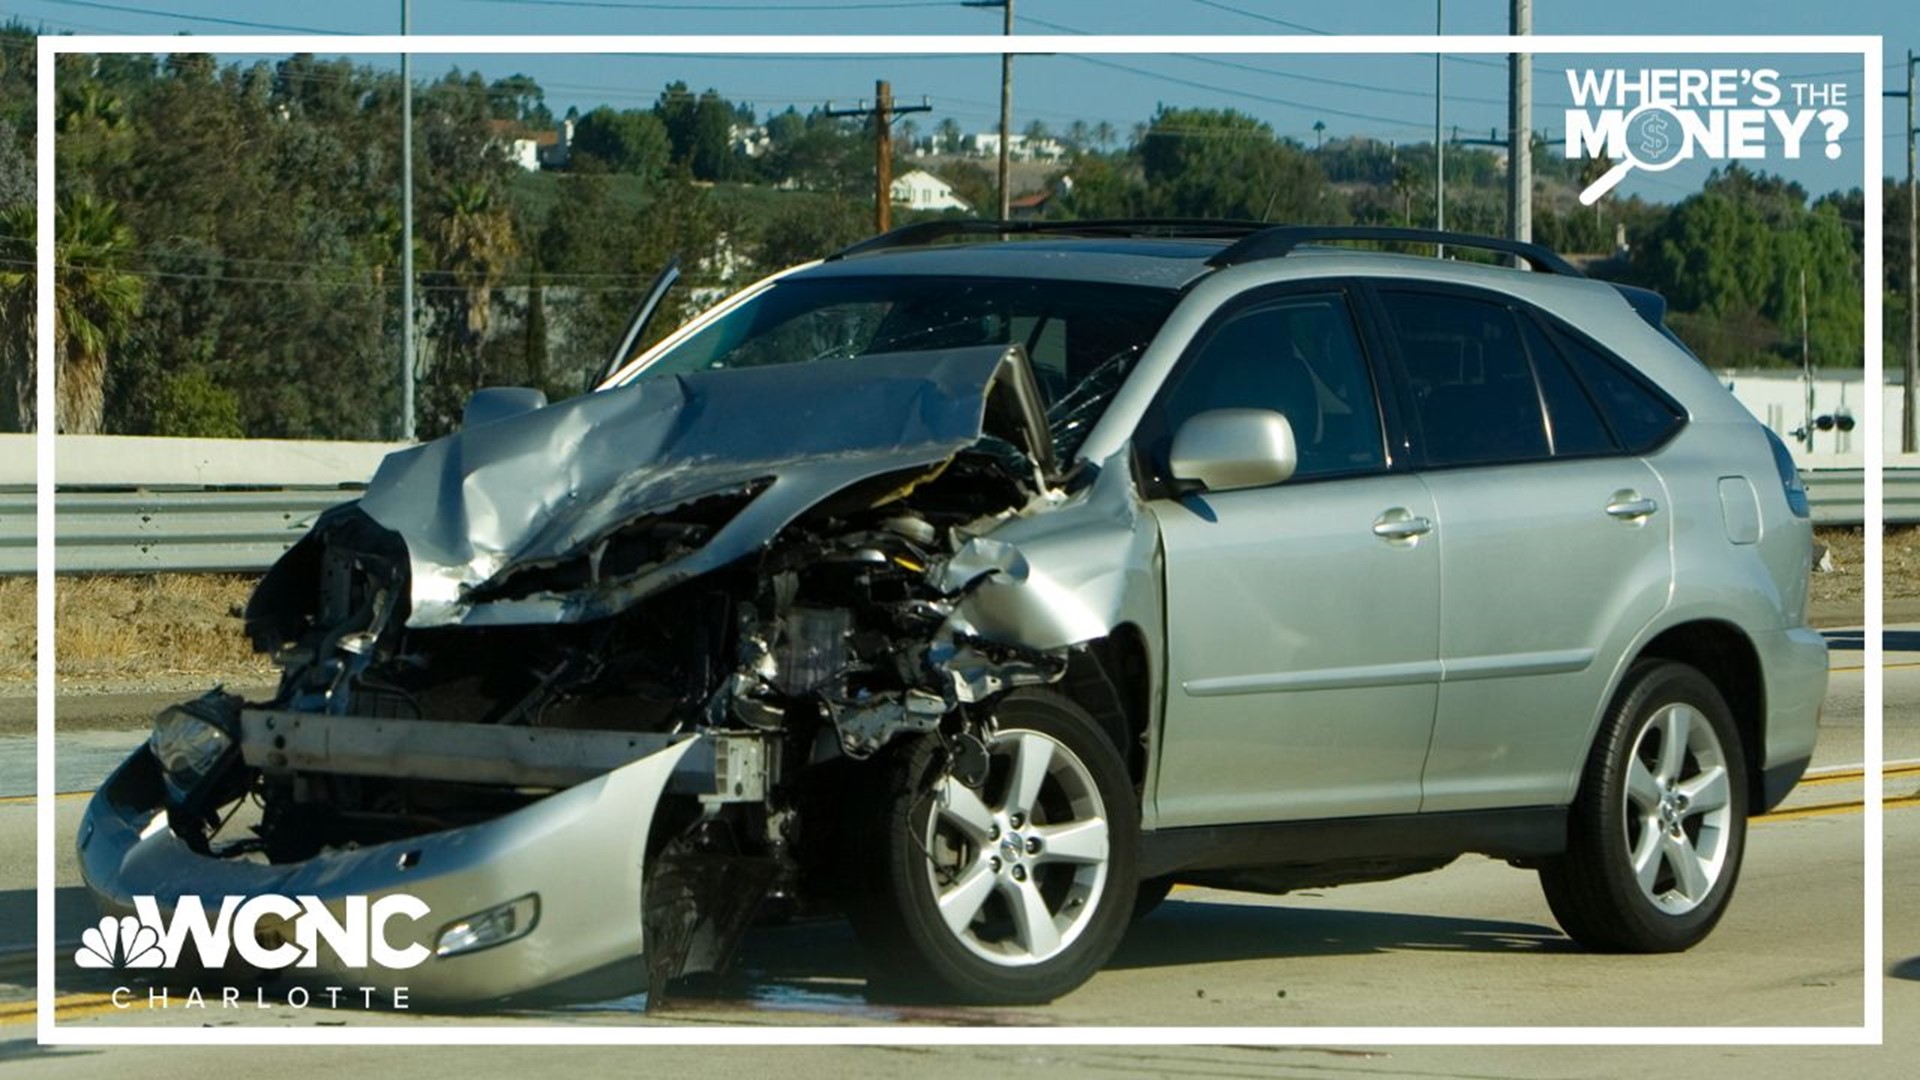 Any wreck has the potential to be expensive, both to fix your car and to cover any medical help you may need.